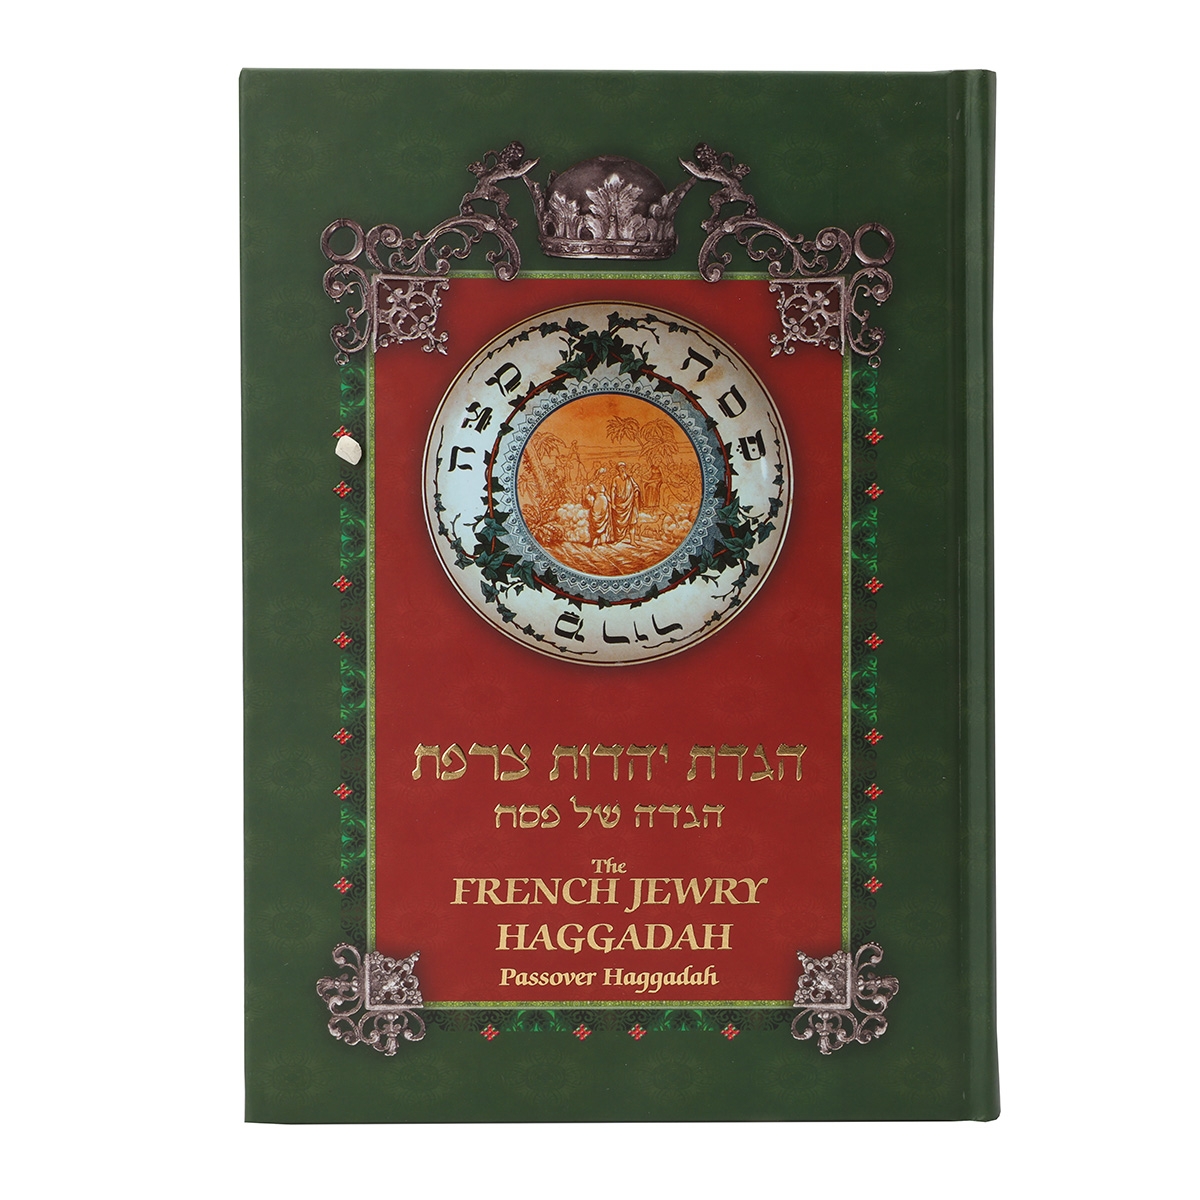 The French Jewry Hebrew-English Passover Haggadah - Hardcover - 1